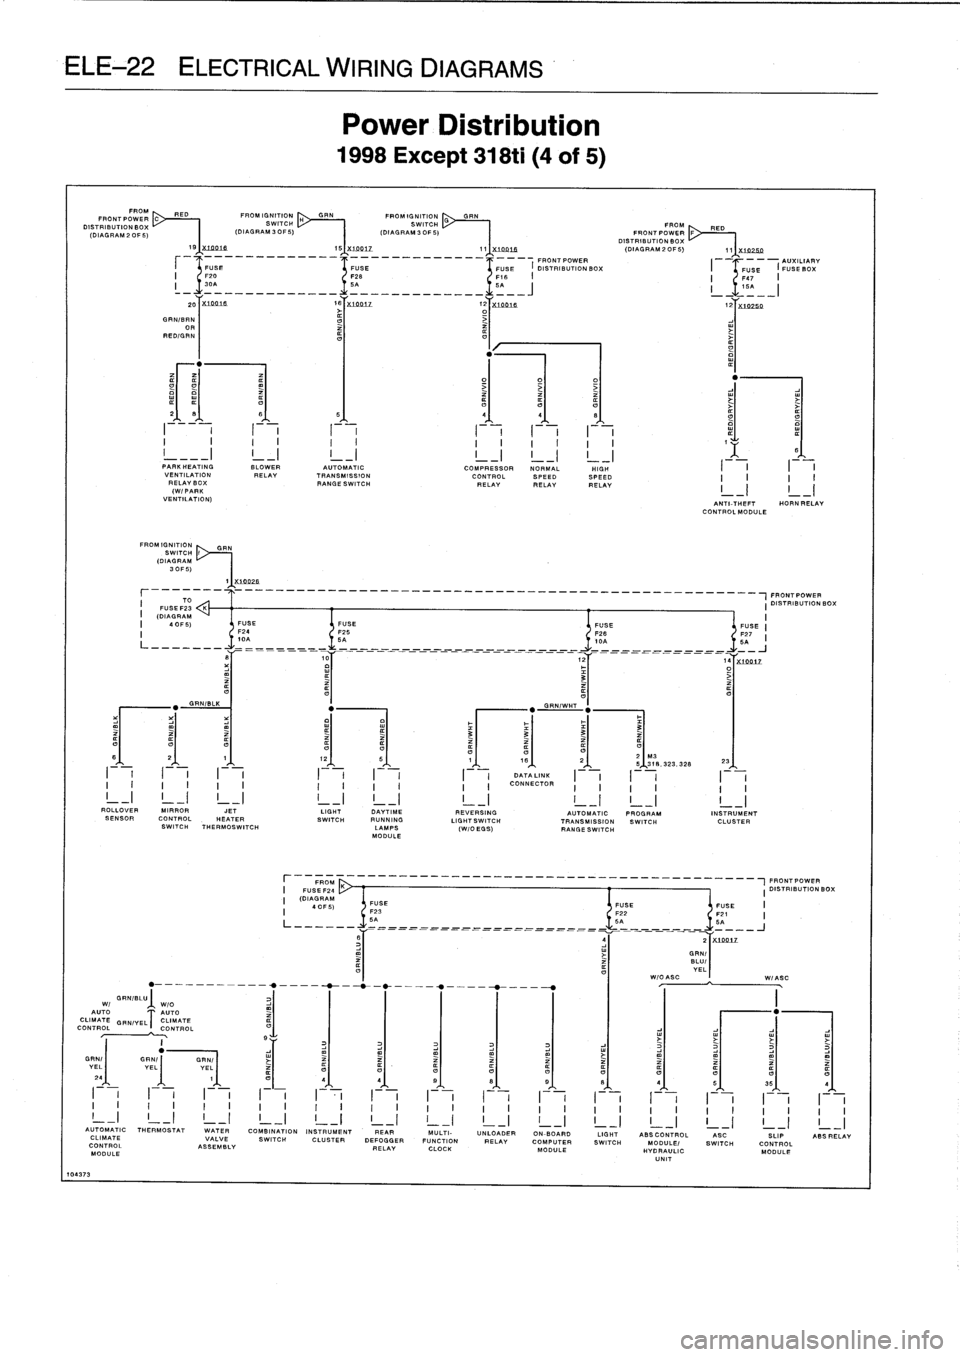 BMW 328i 1995 E36 Owners Guide 
ELE-22

ELECTRICAL
WIRING
DIAGRAMS

GRNIBLU
Wl

WIO

AUTO

AUTO

CLIMATE

GEN/YELT
CLIMATE

CONTROL

CONTROL

10437
3

FP

OM~
	

PED
FRONTPOWER
DISTRIBUTION

BOY%

(DIAGRAM

2
OF
5)

S

FROMIGNITION